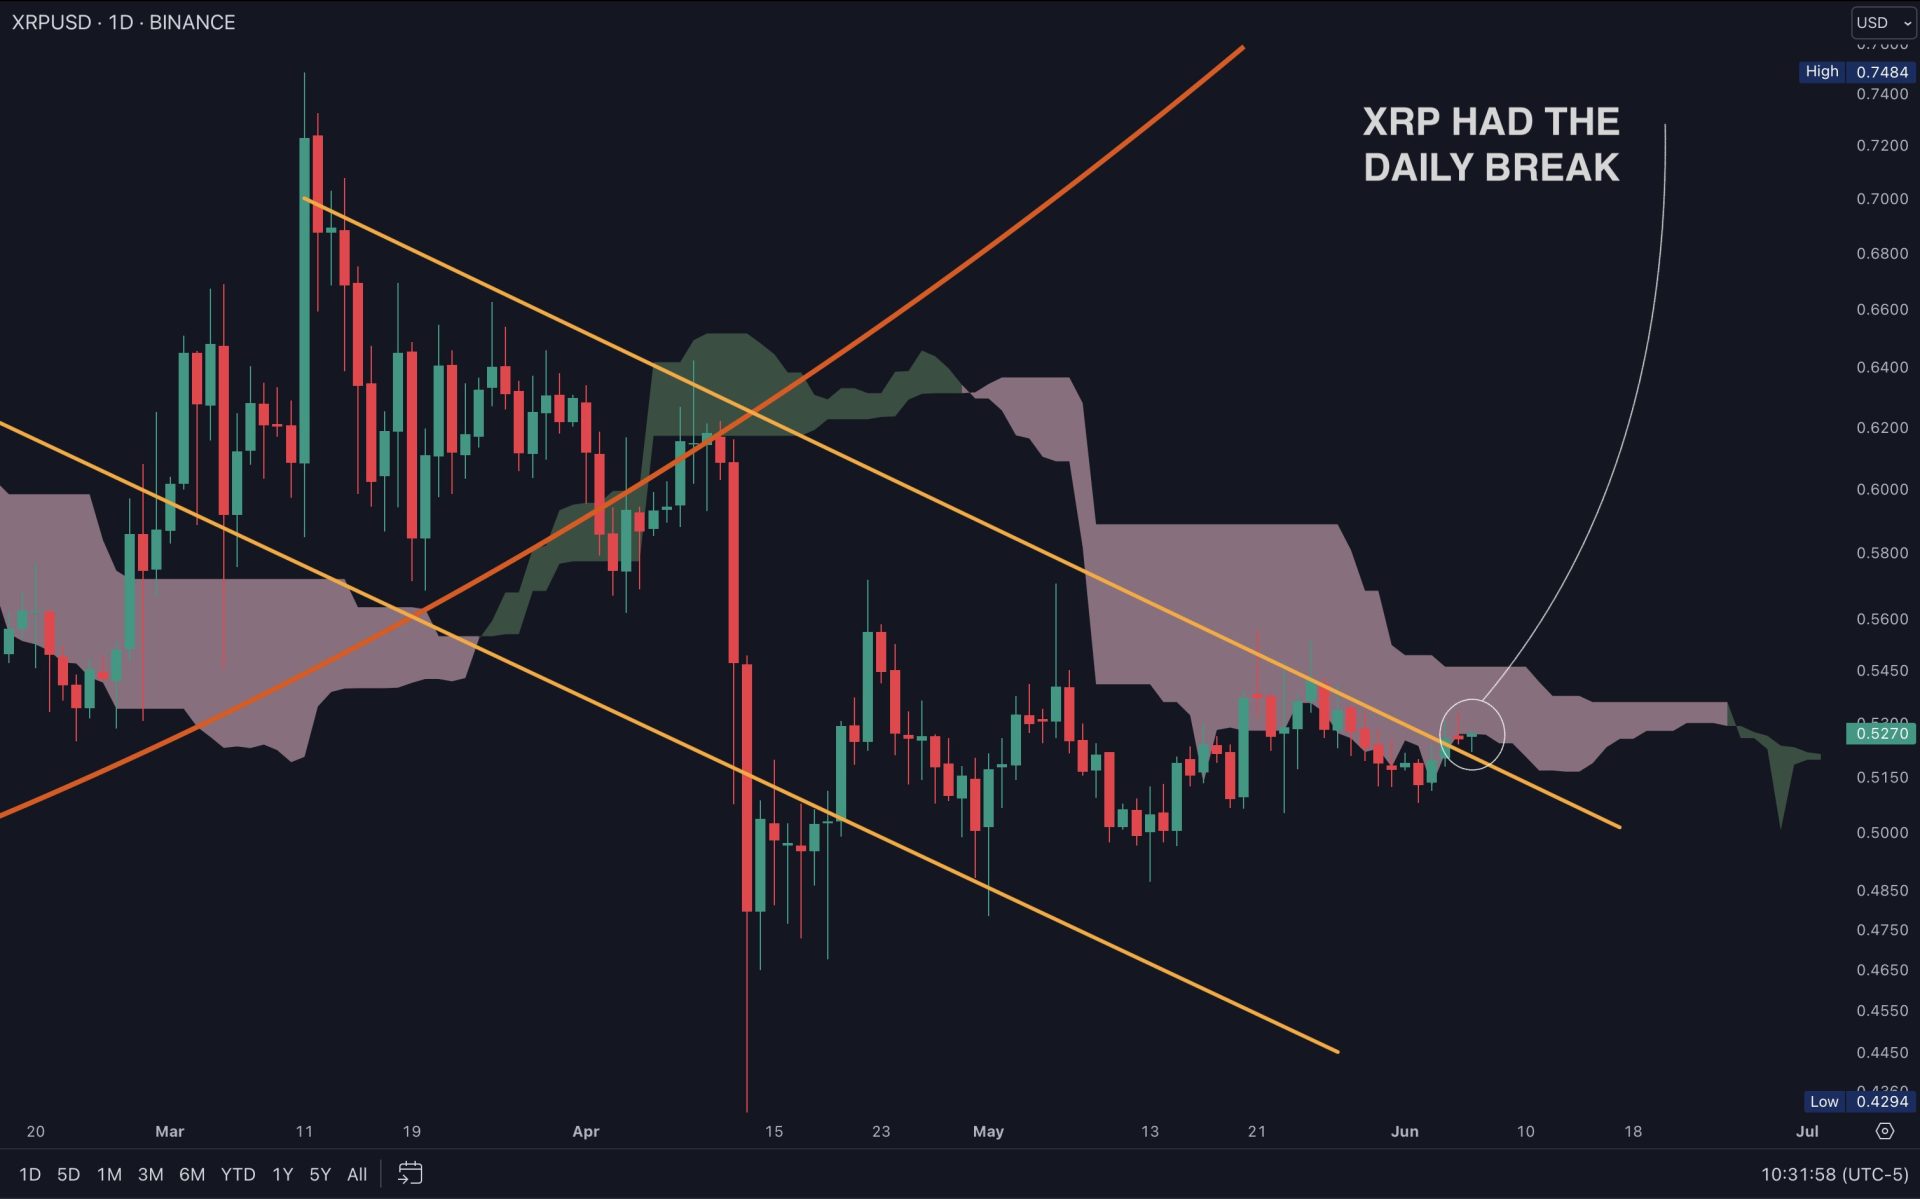 Top Analyst Confirms XRP Cup and Handle Breakout